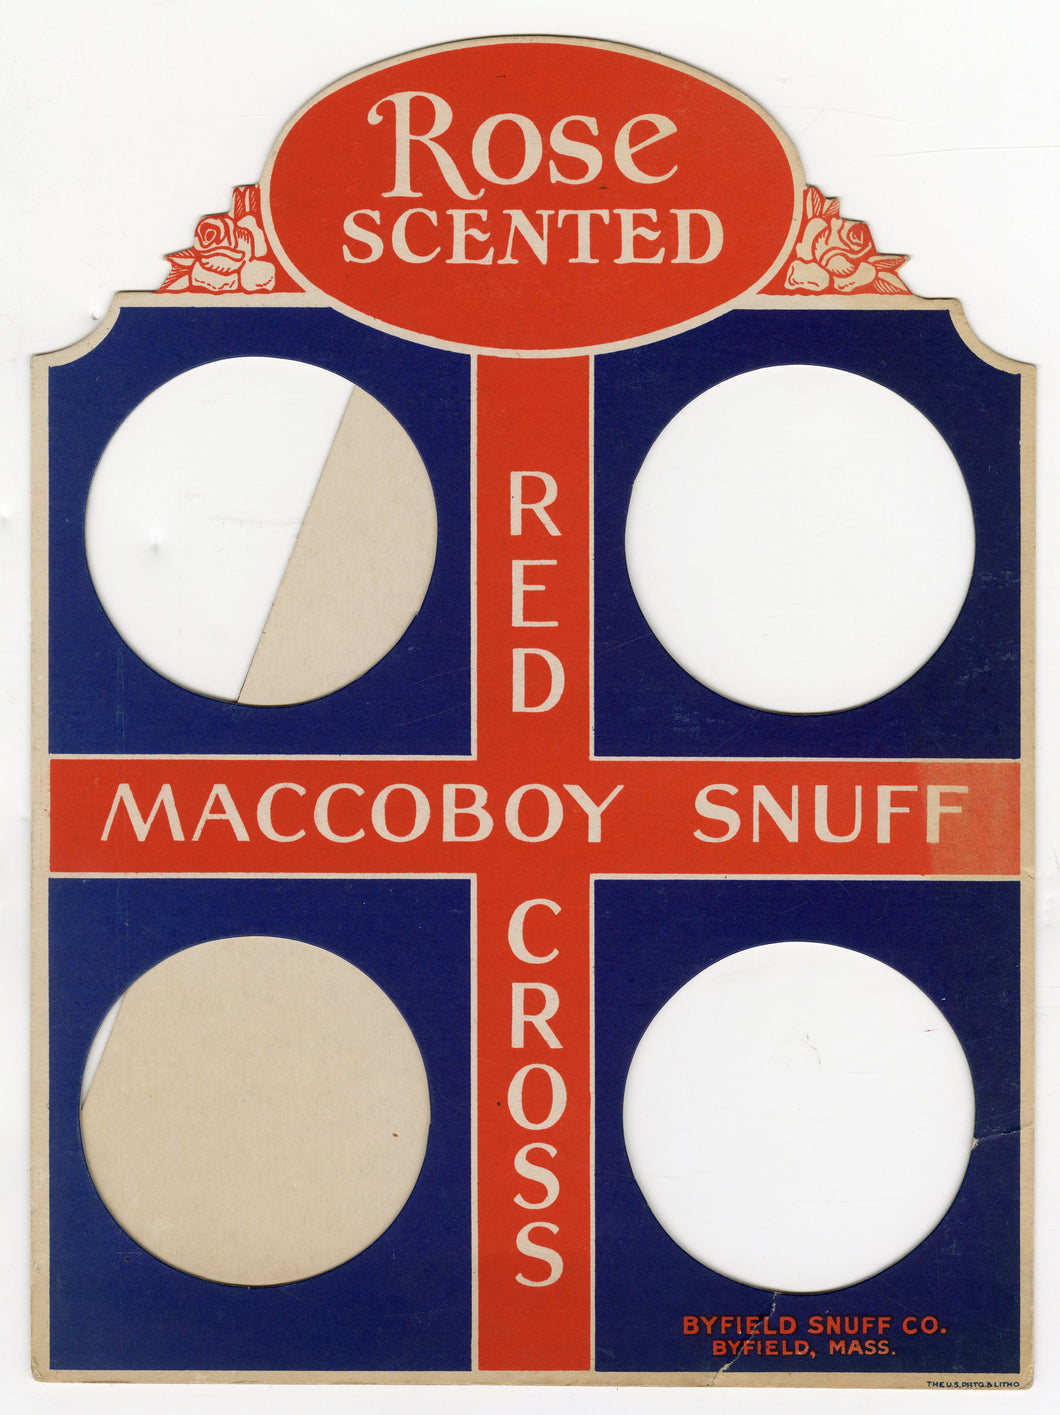 Antique Rose Scented MACCOBOY SNUFF STORE DISPLAY, Red Cross